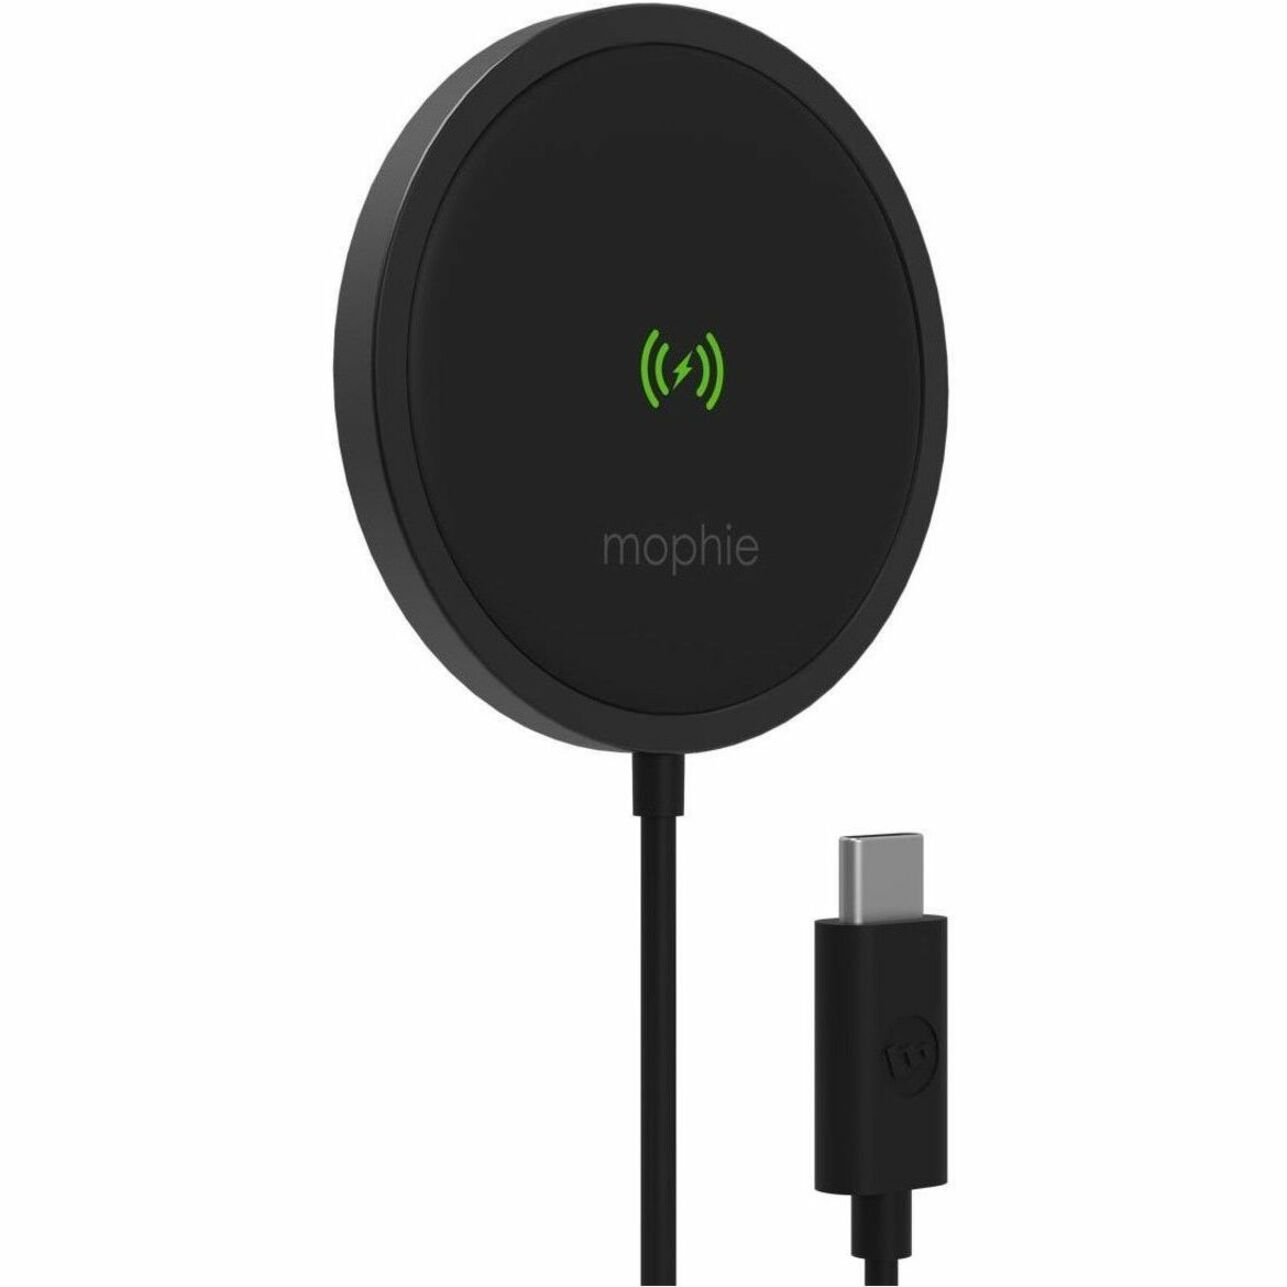 mophie snap+ Induction Charger (401307633)